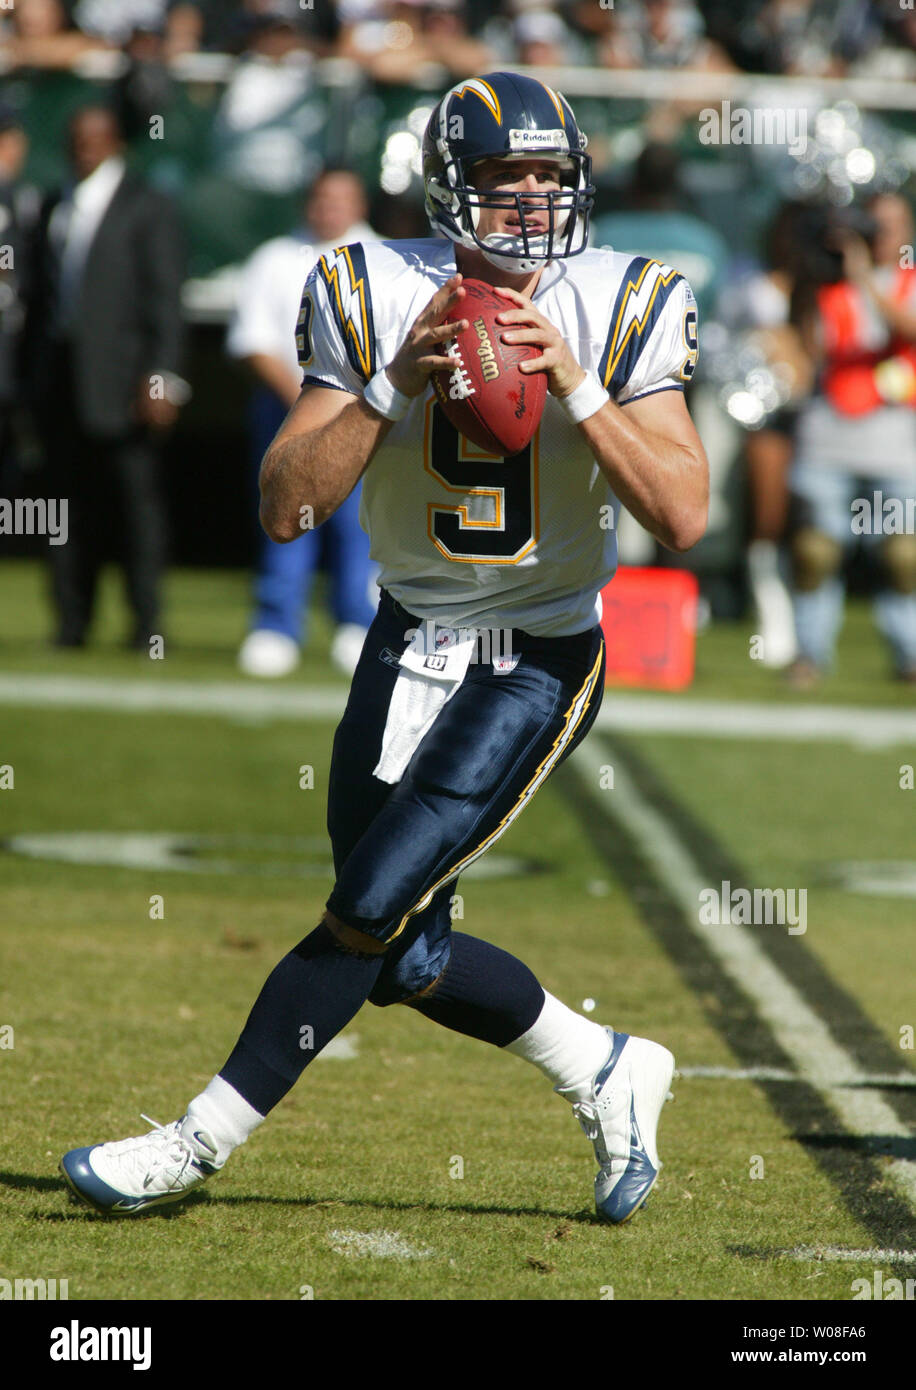 San Diego Chargers pro bowl quarterback Drew Brees tooses a pass during  drills at the team's training camp Tuesday Aug. 16, 2005 in San Diego. The  Chargers placed the franchise tag on